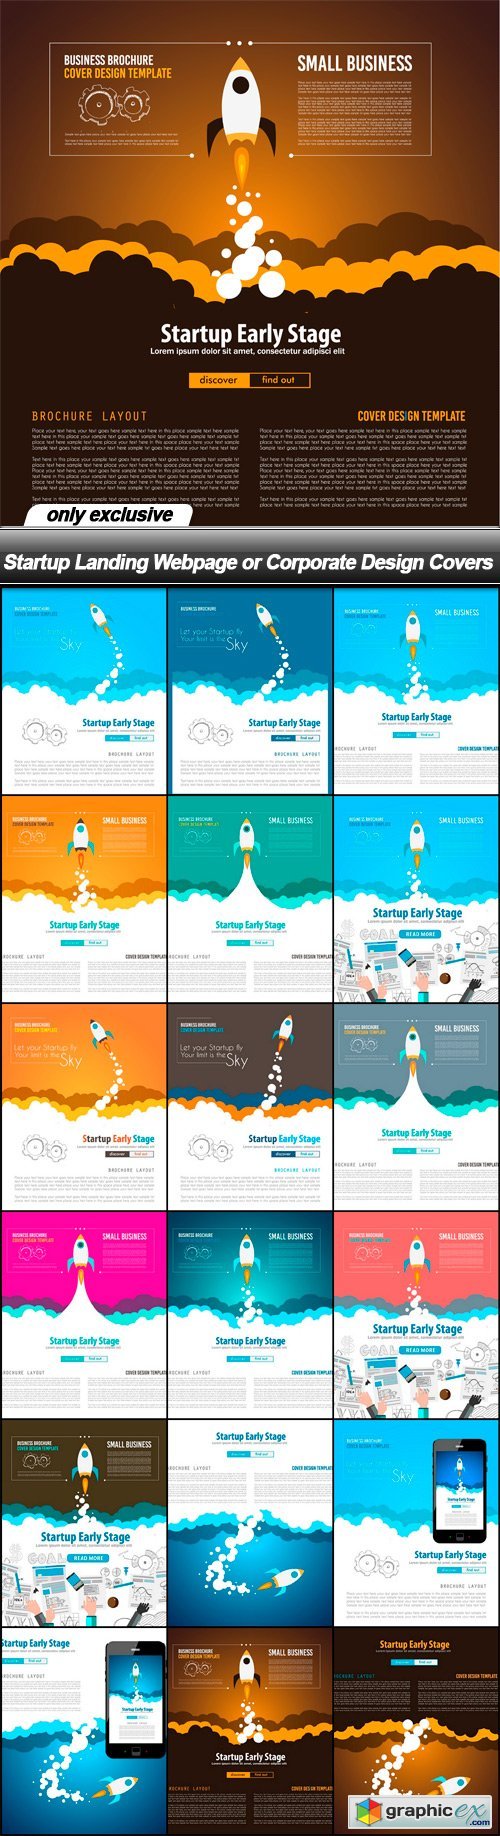 Startup Landing Webpage or Corporate Design Covers - 18 EPS